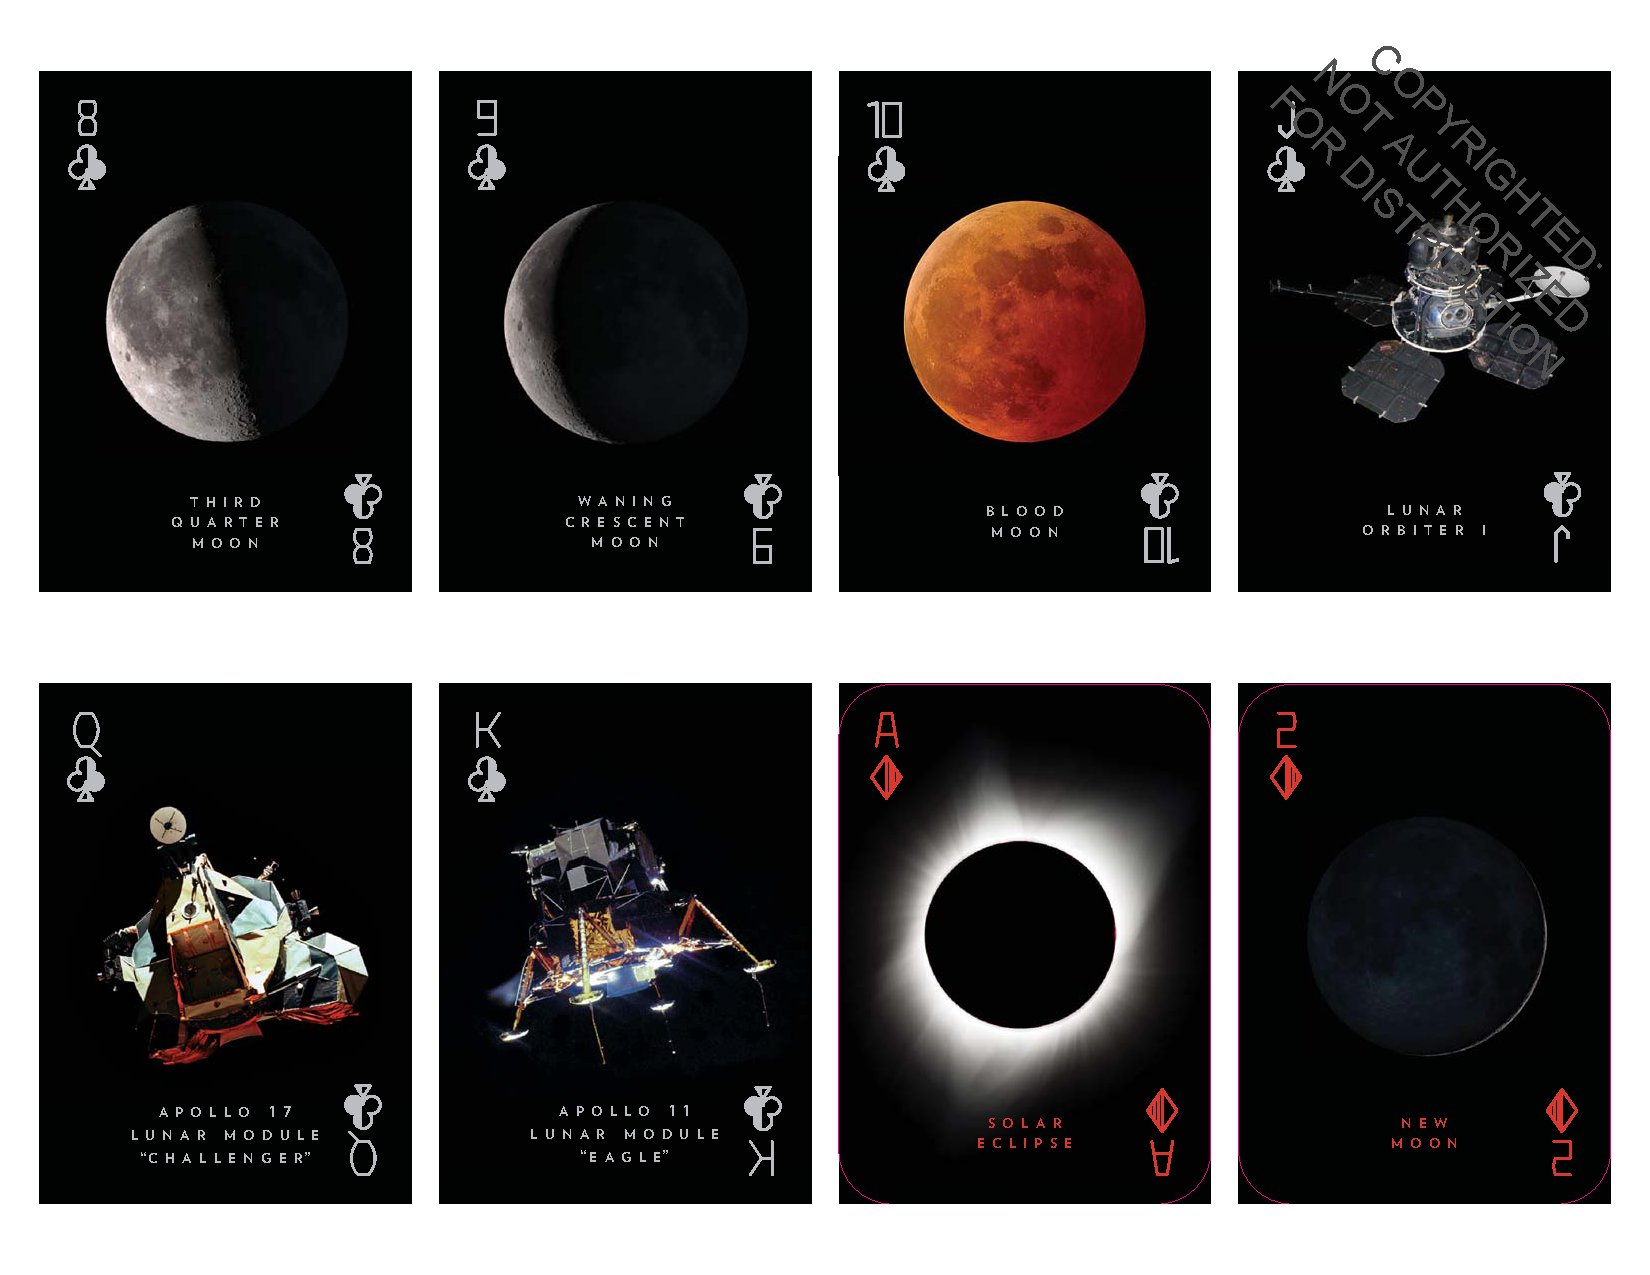 Moon Playing Cards